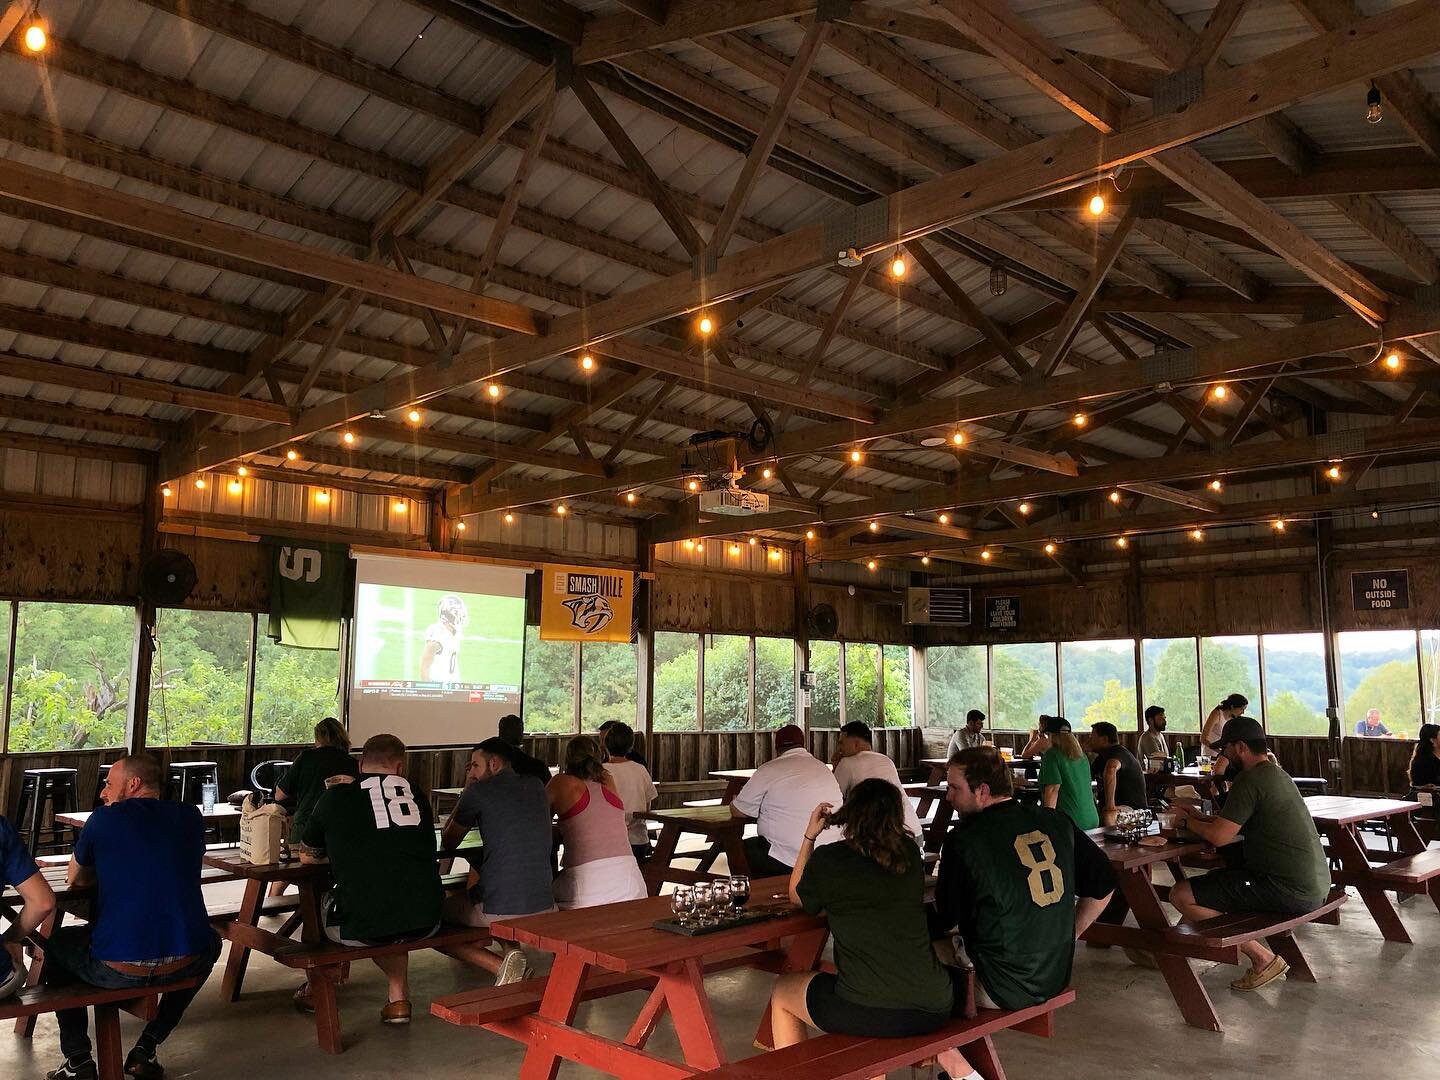 College football is back and we can&rsquo;t wait to see ya in the Barn out back - or in the taprooms, on those brand-new 75&rdquo; screens 🤤

#brewery #football #collegefootball #nashville